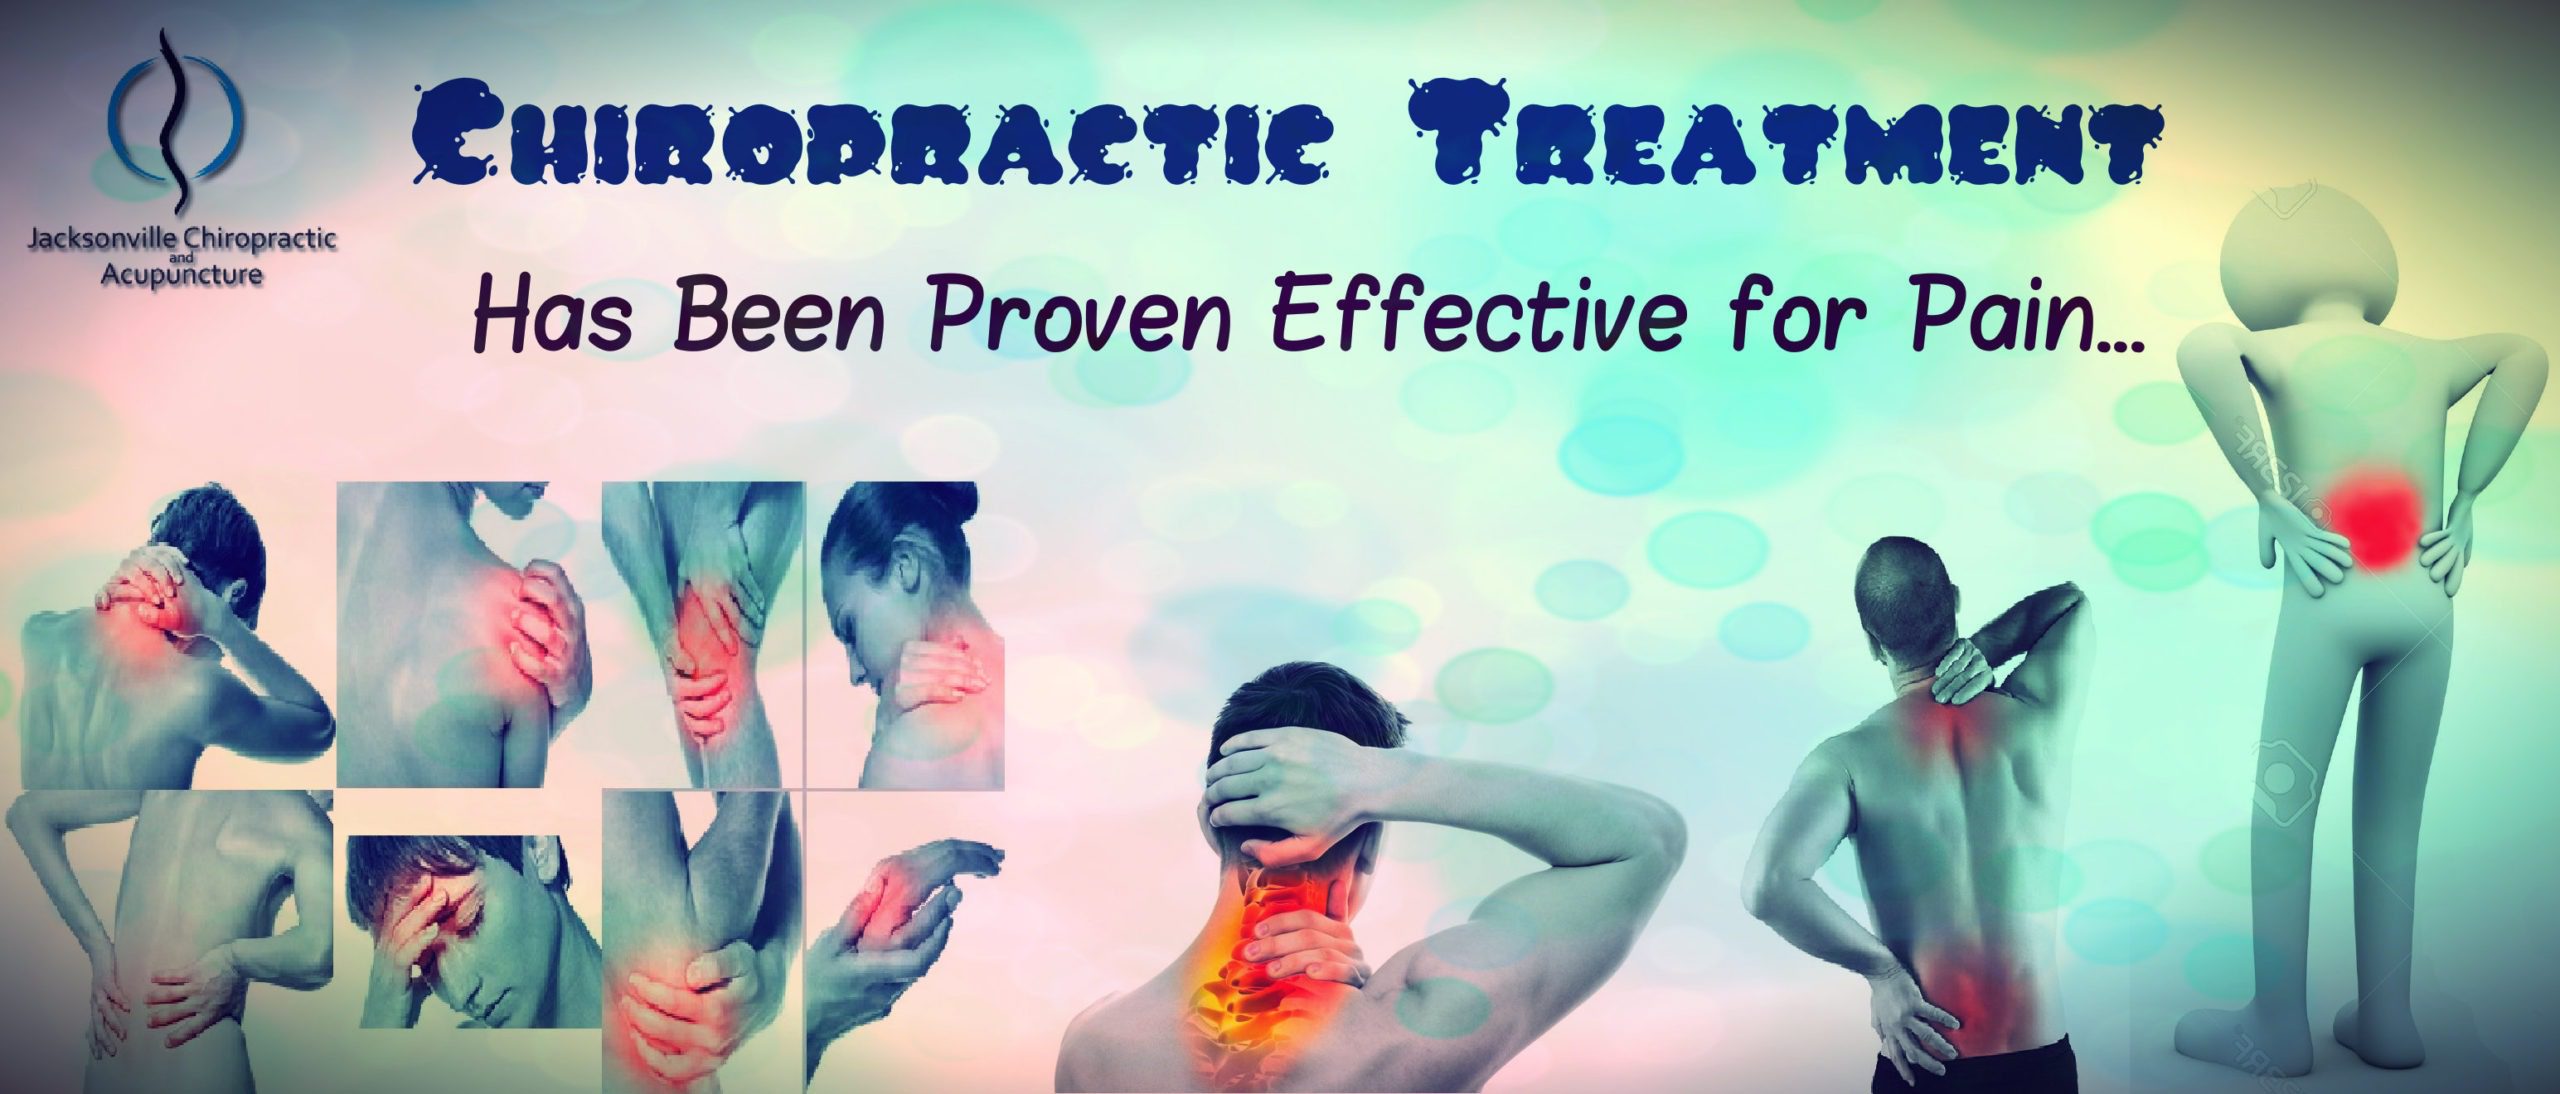 Chiropractic-Treatment-Has-Been-Proven-Effective-for-Pain